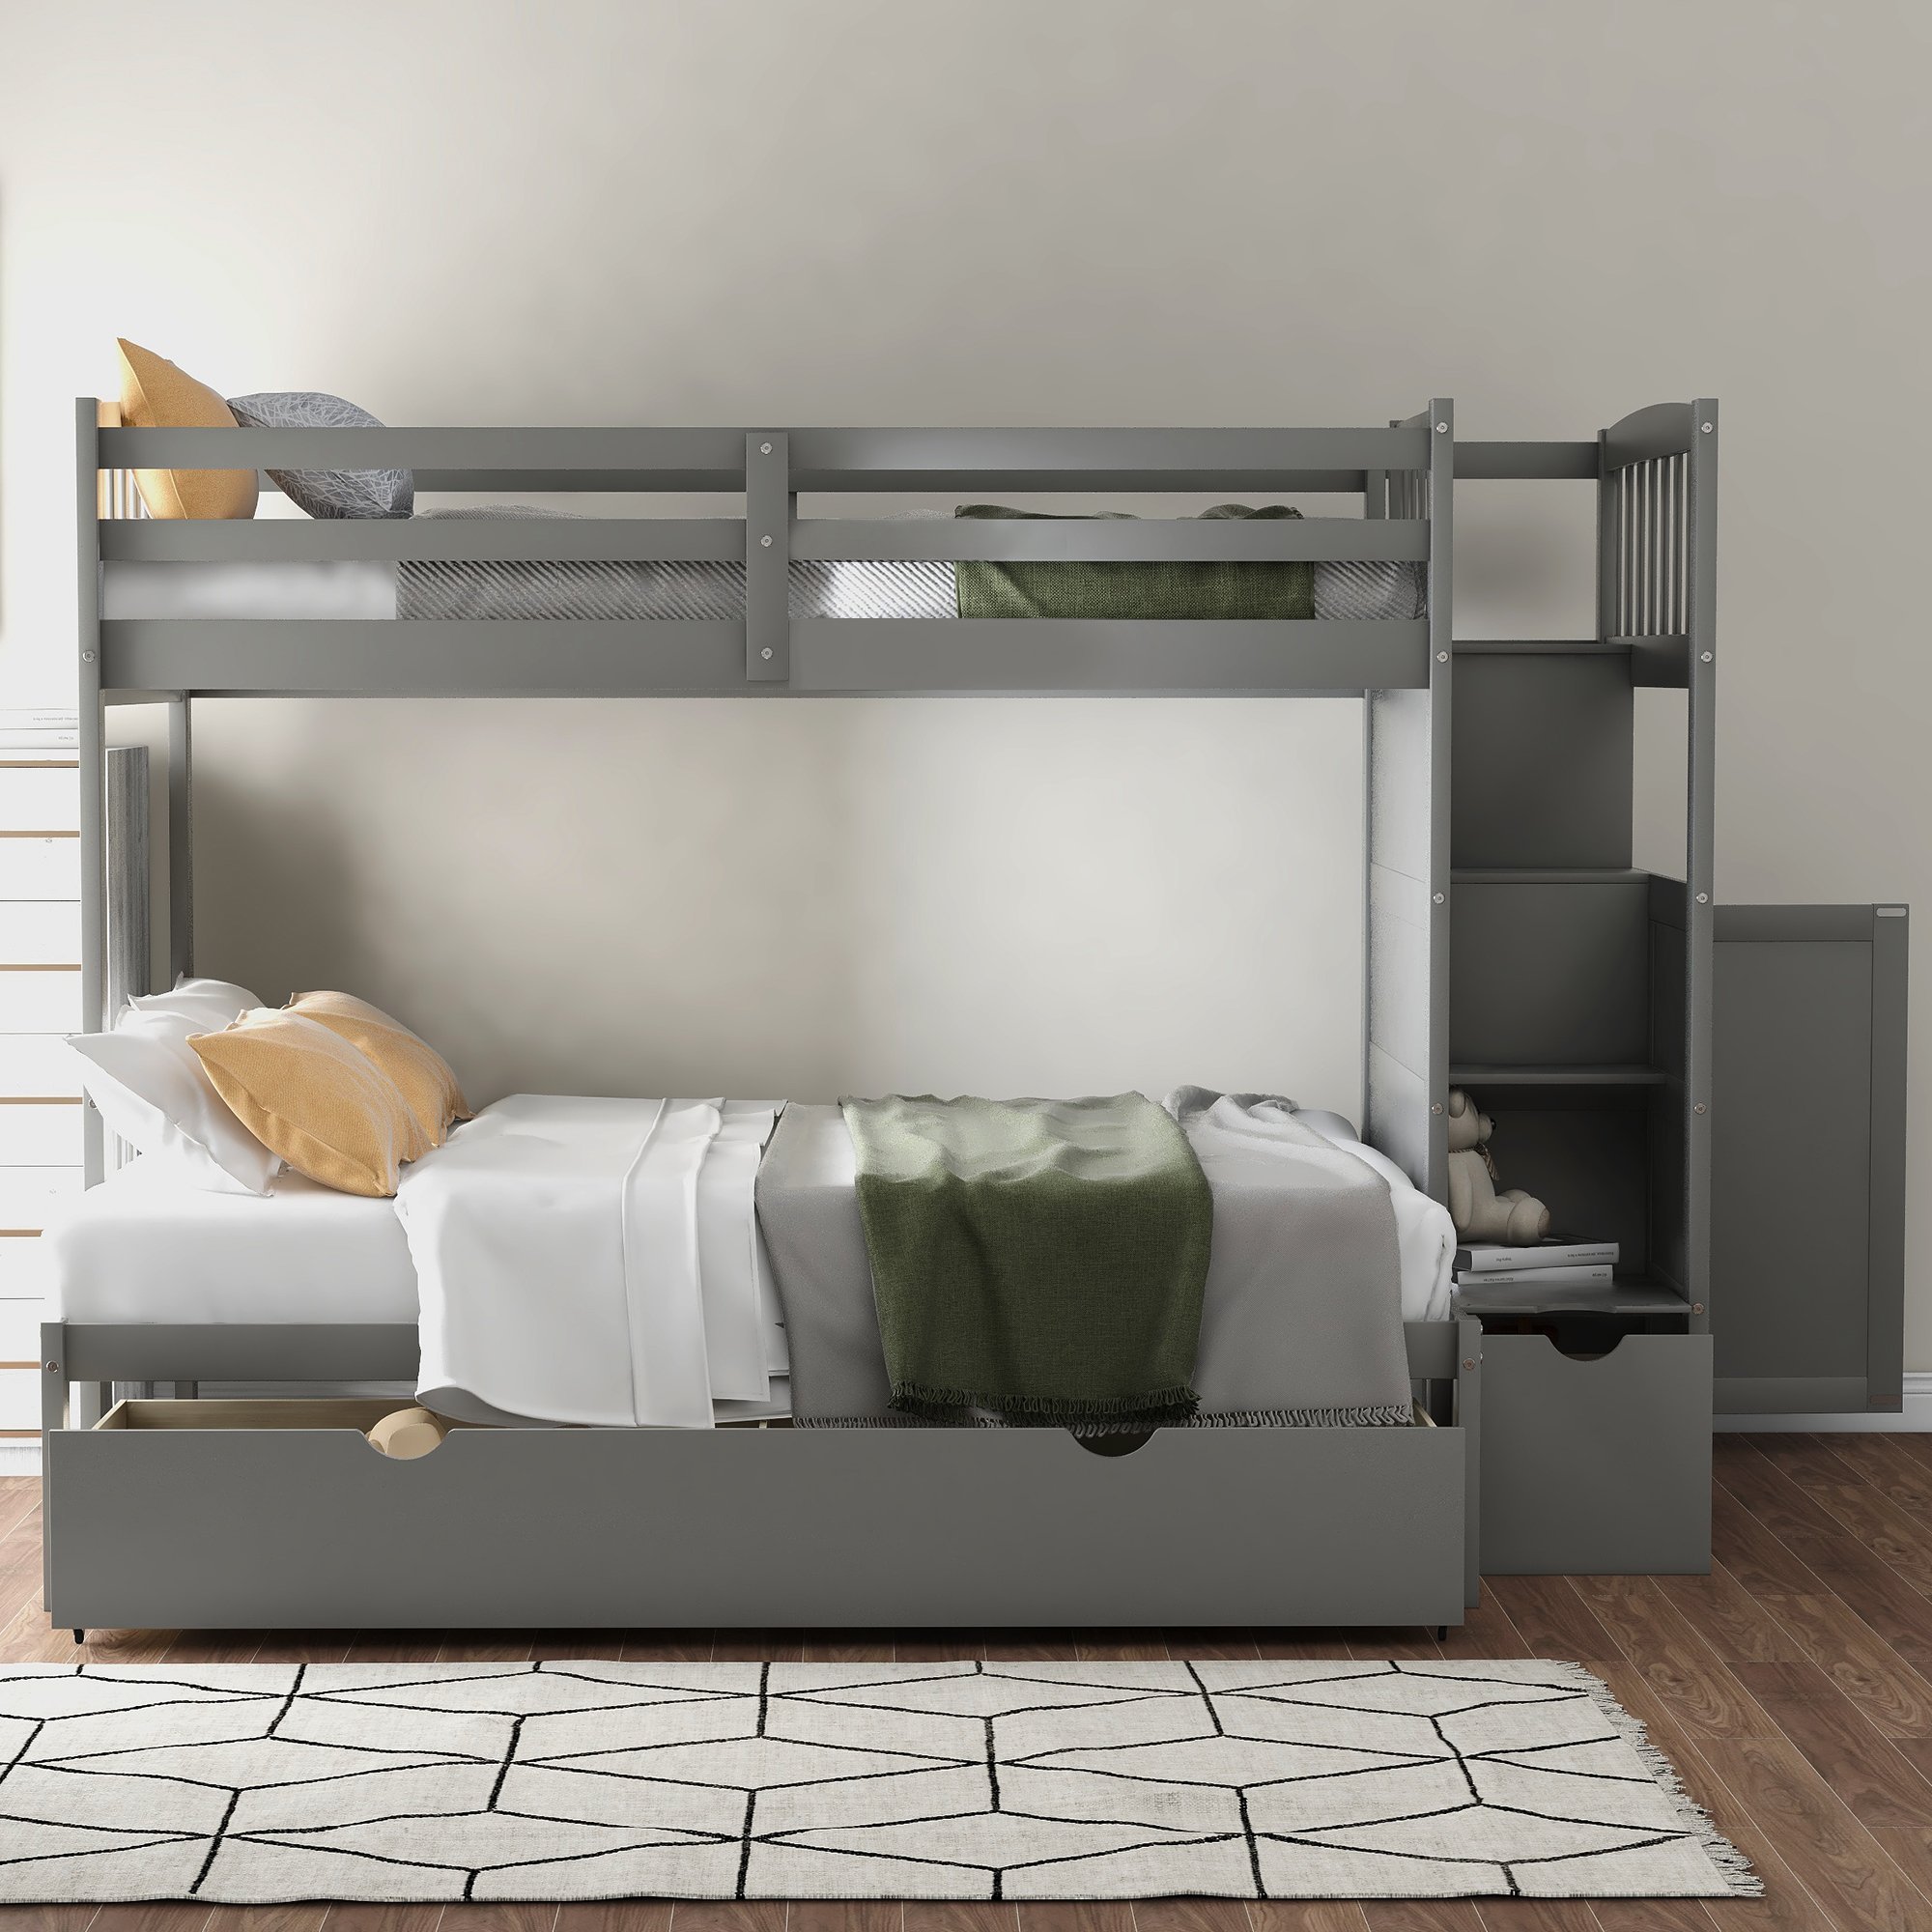 Creatice Cool Bunk Bed with Simple Decor